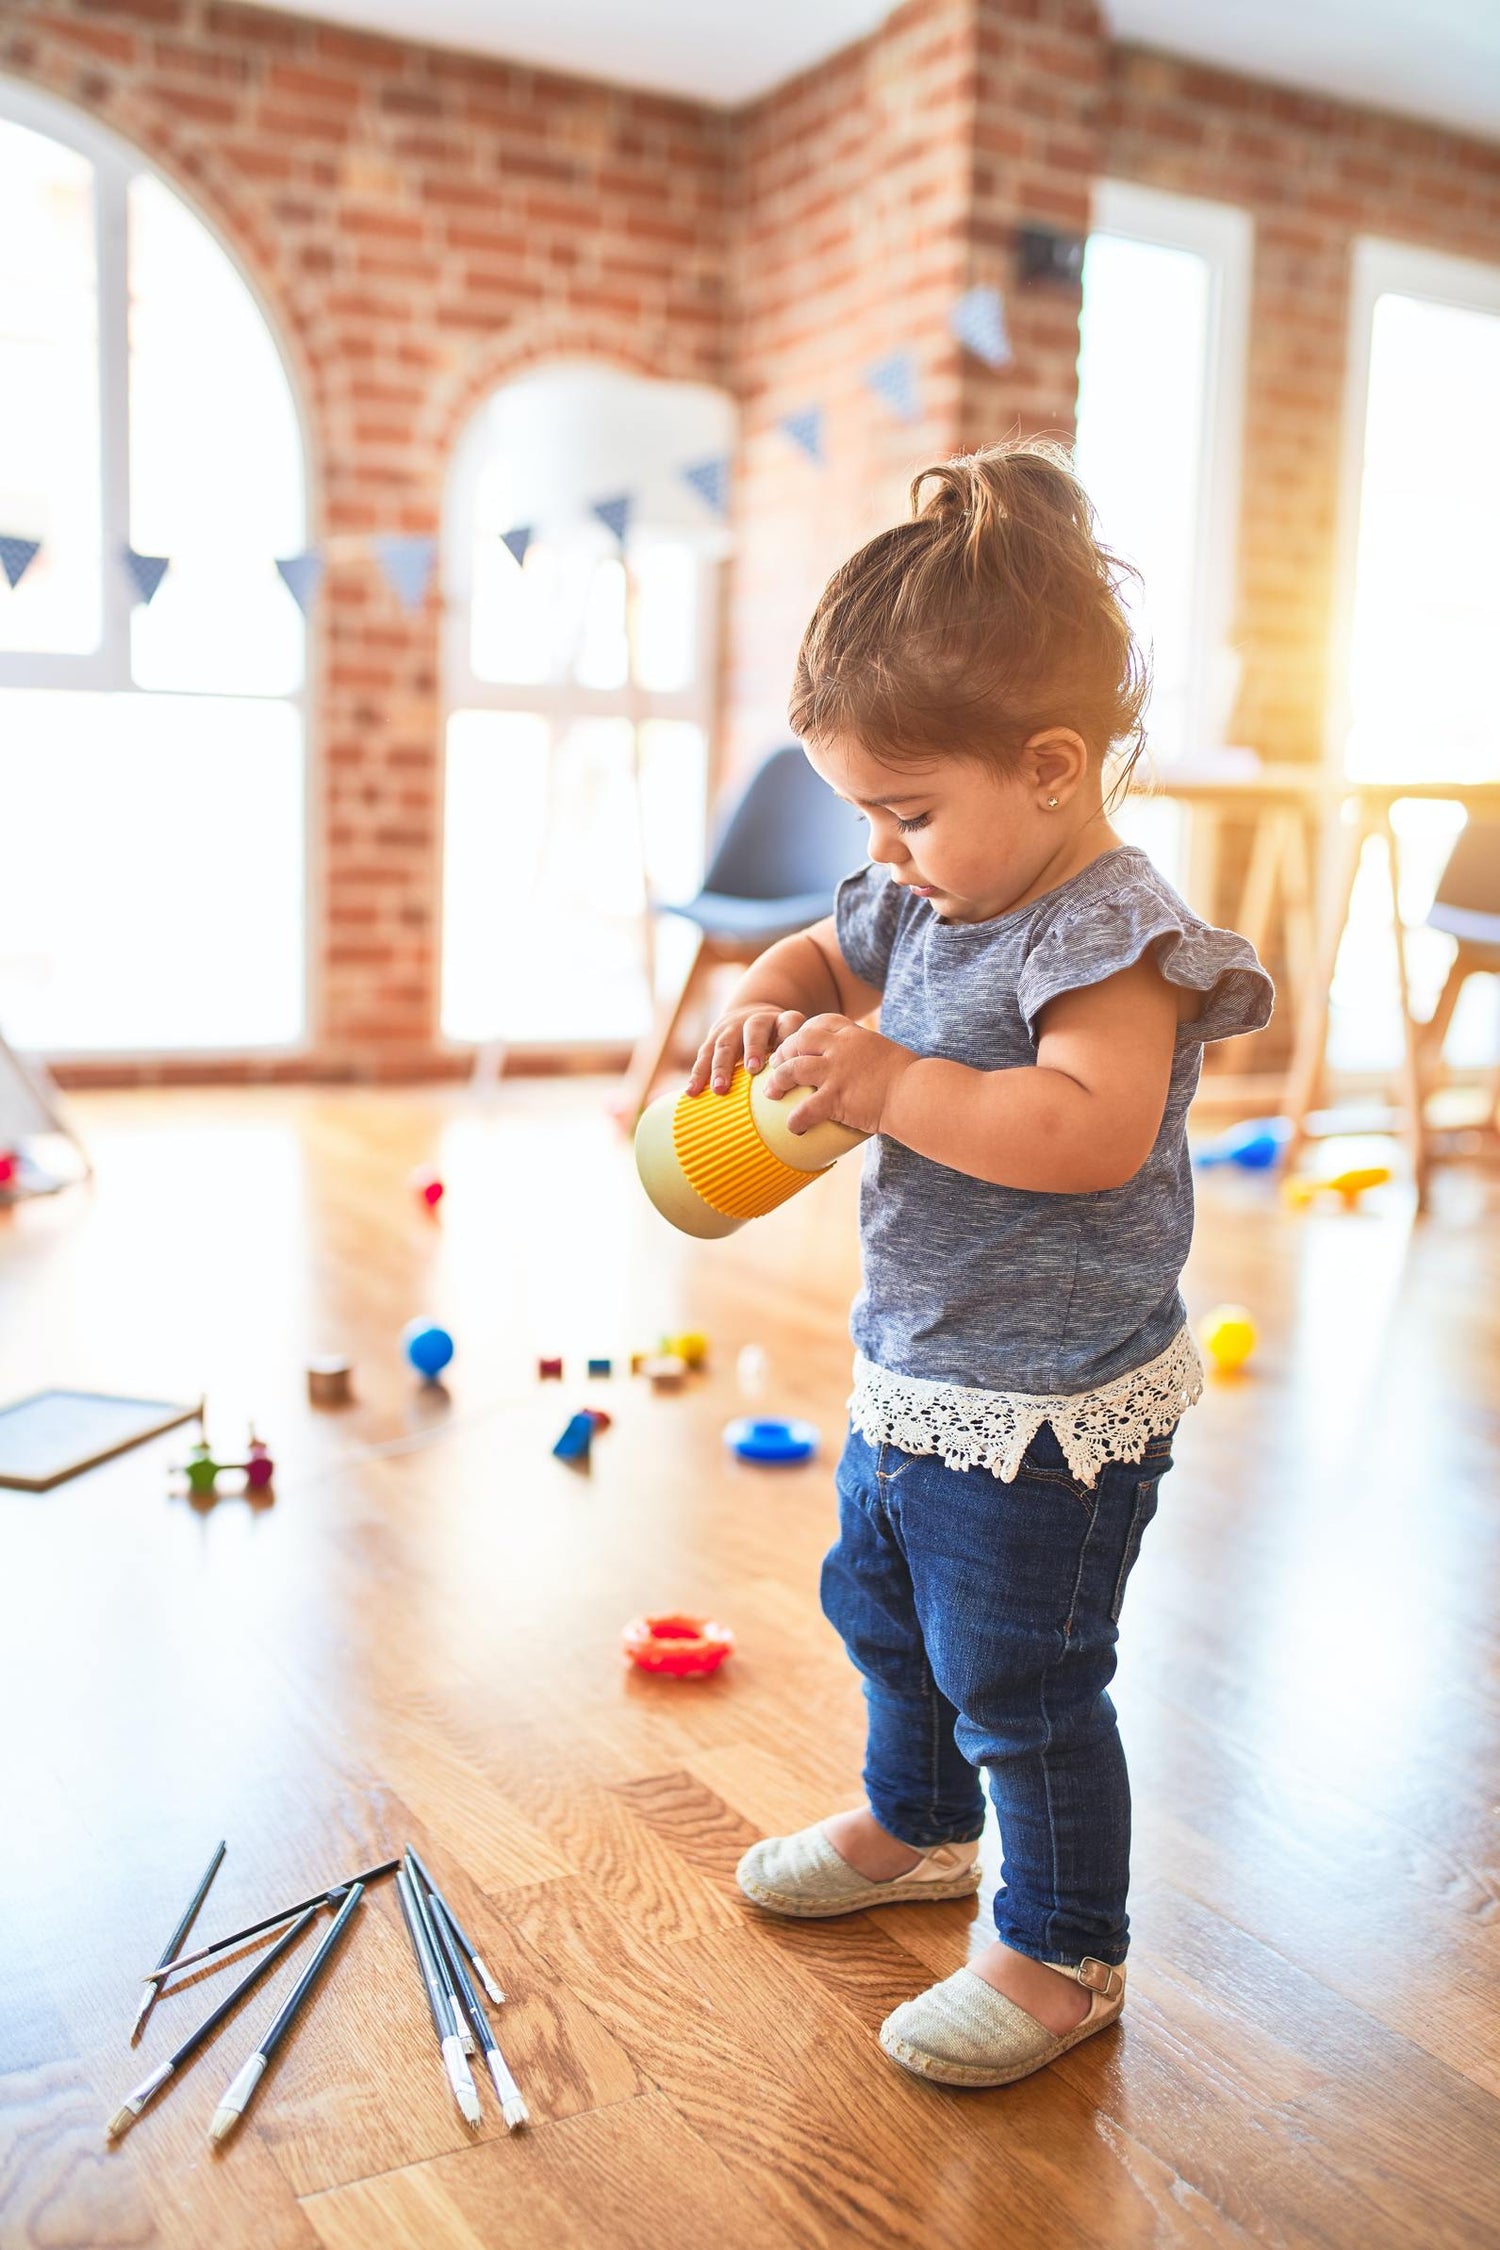 Play is the way to learn. Buy daycare toys online,educational wooden toys for kids to explore and learn.Building blocks encourages balancing,stacking,counting and helps understand early math skills.